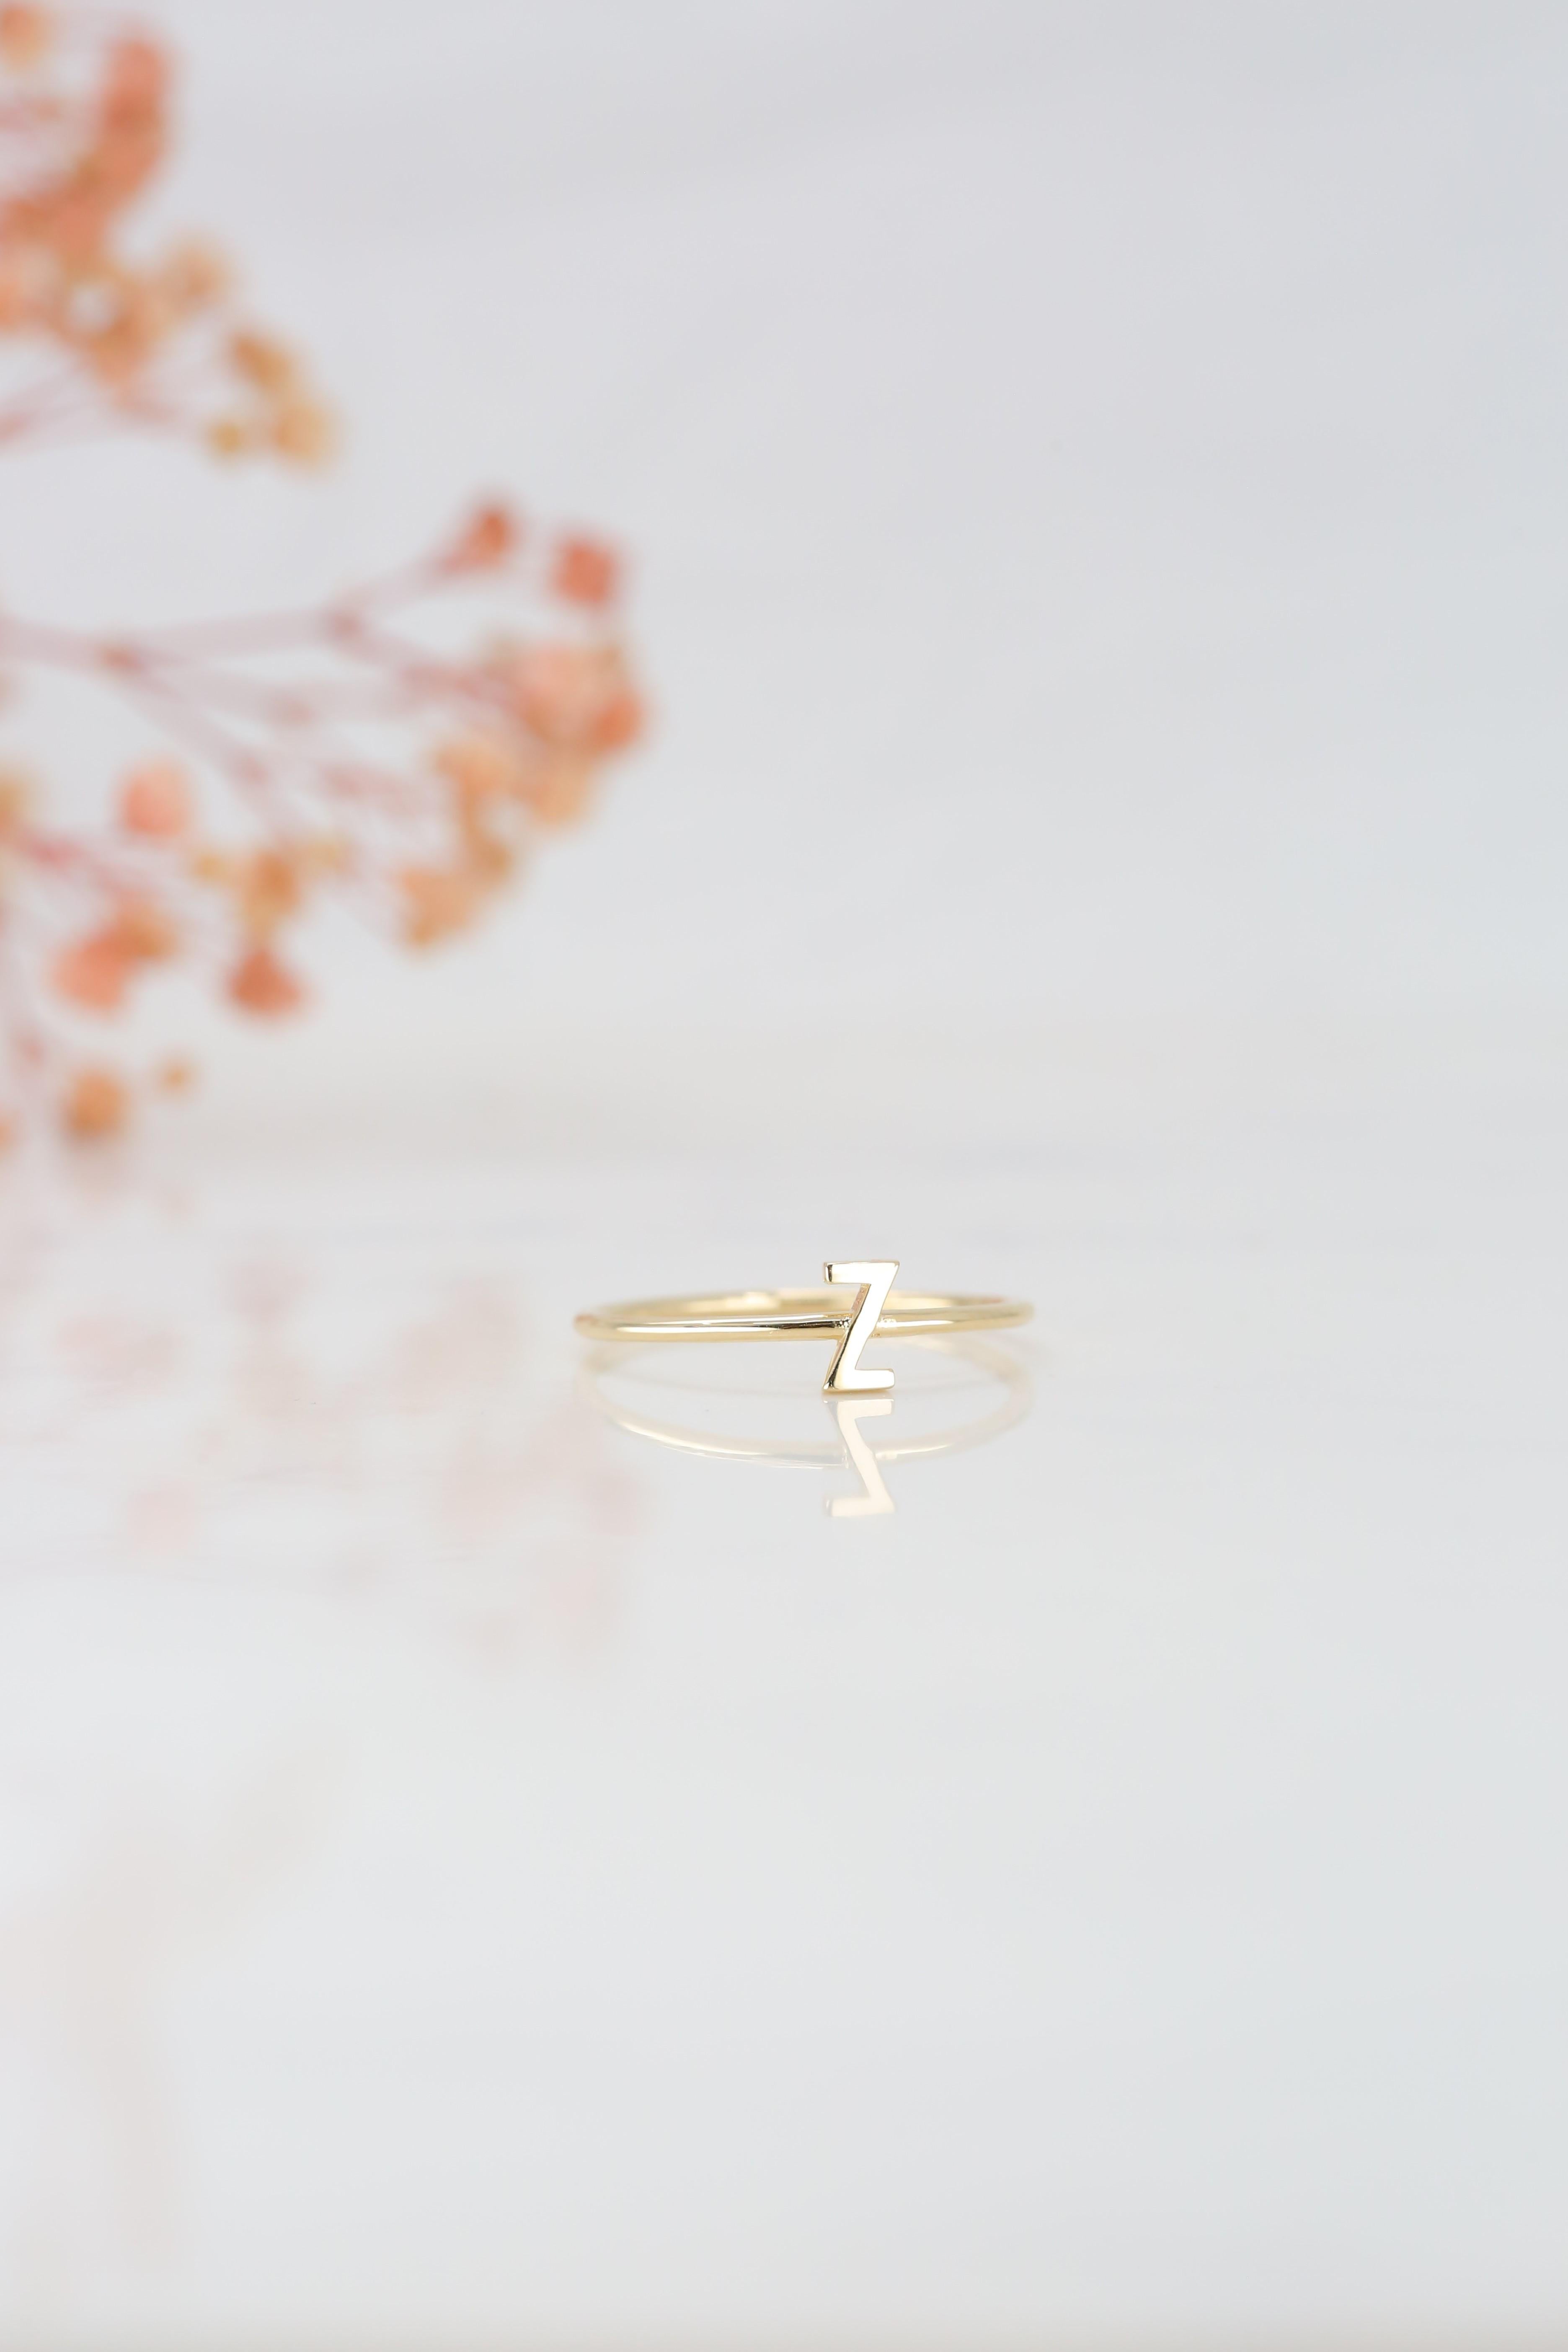 For Sale:  14K Gold Initial Z Letter Ring, Personalized Initial Letter Ring 7